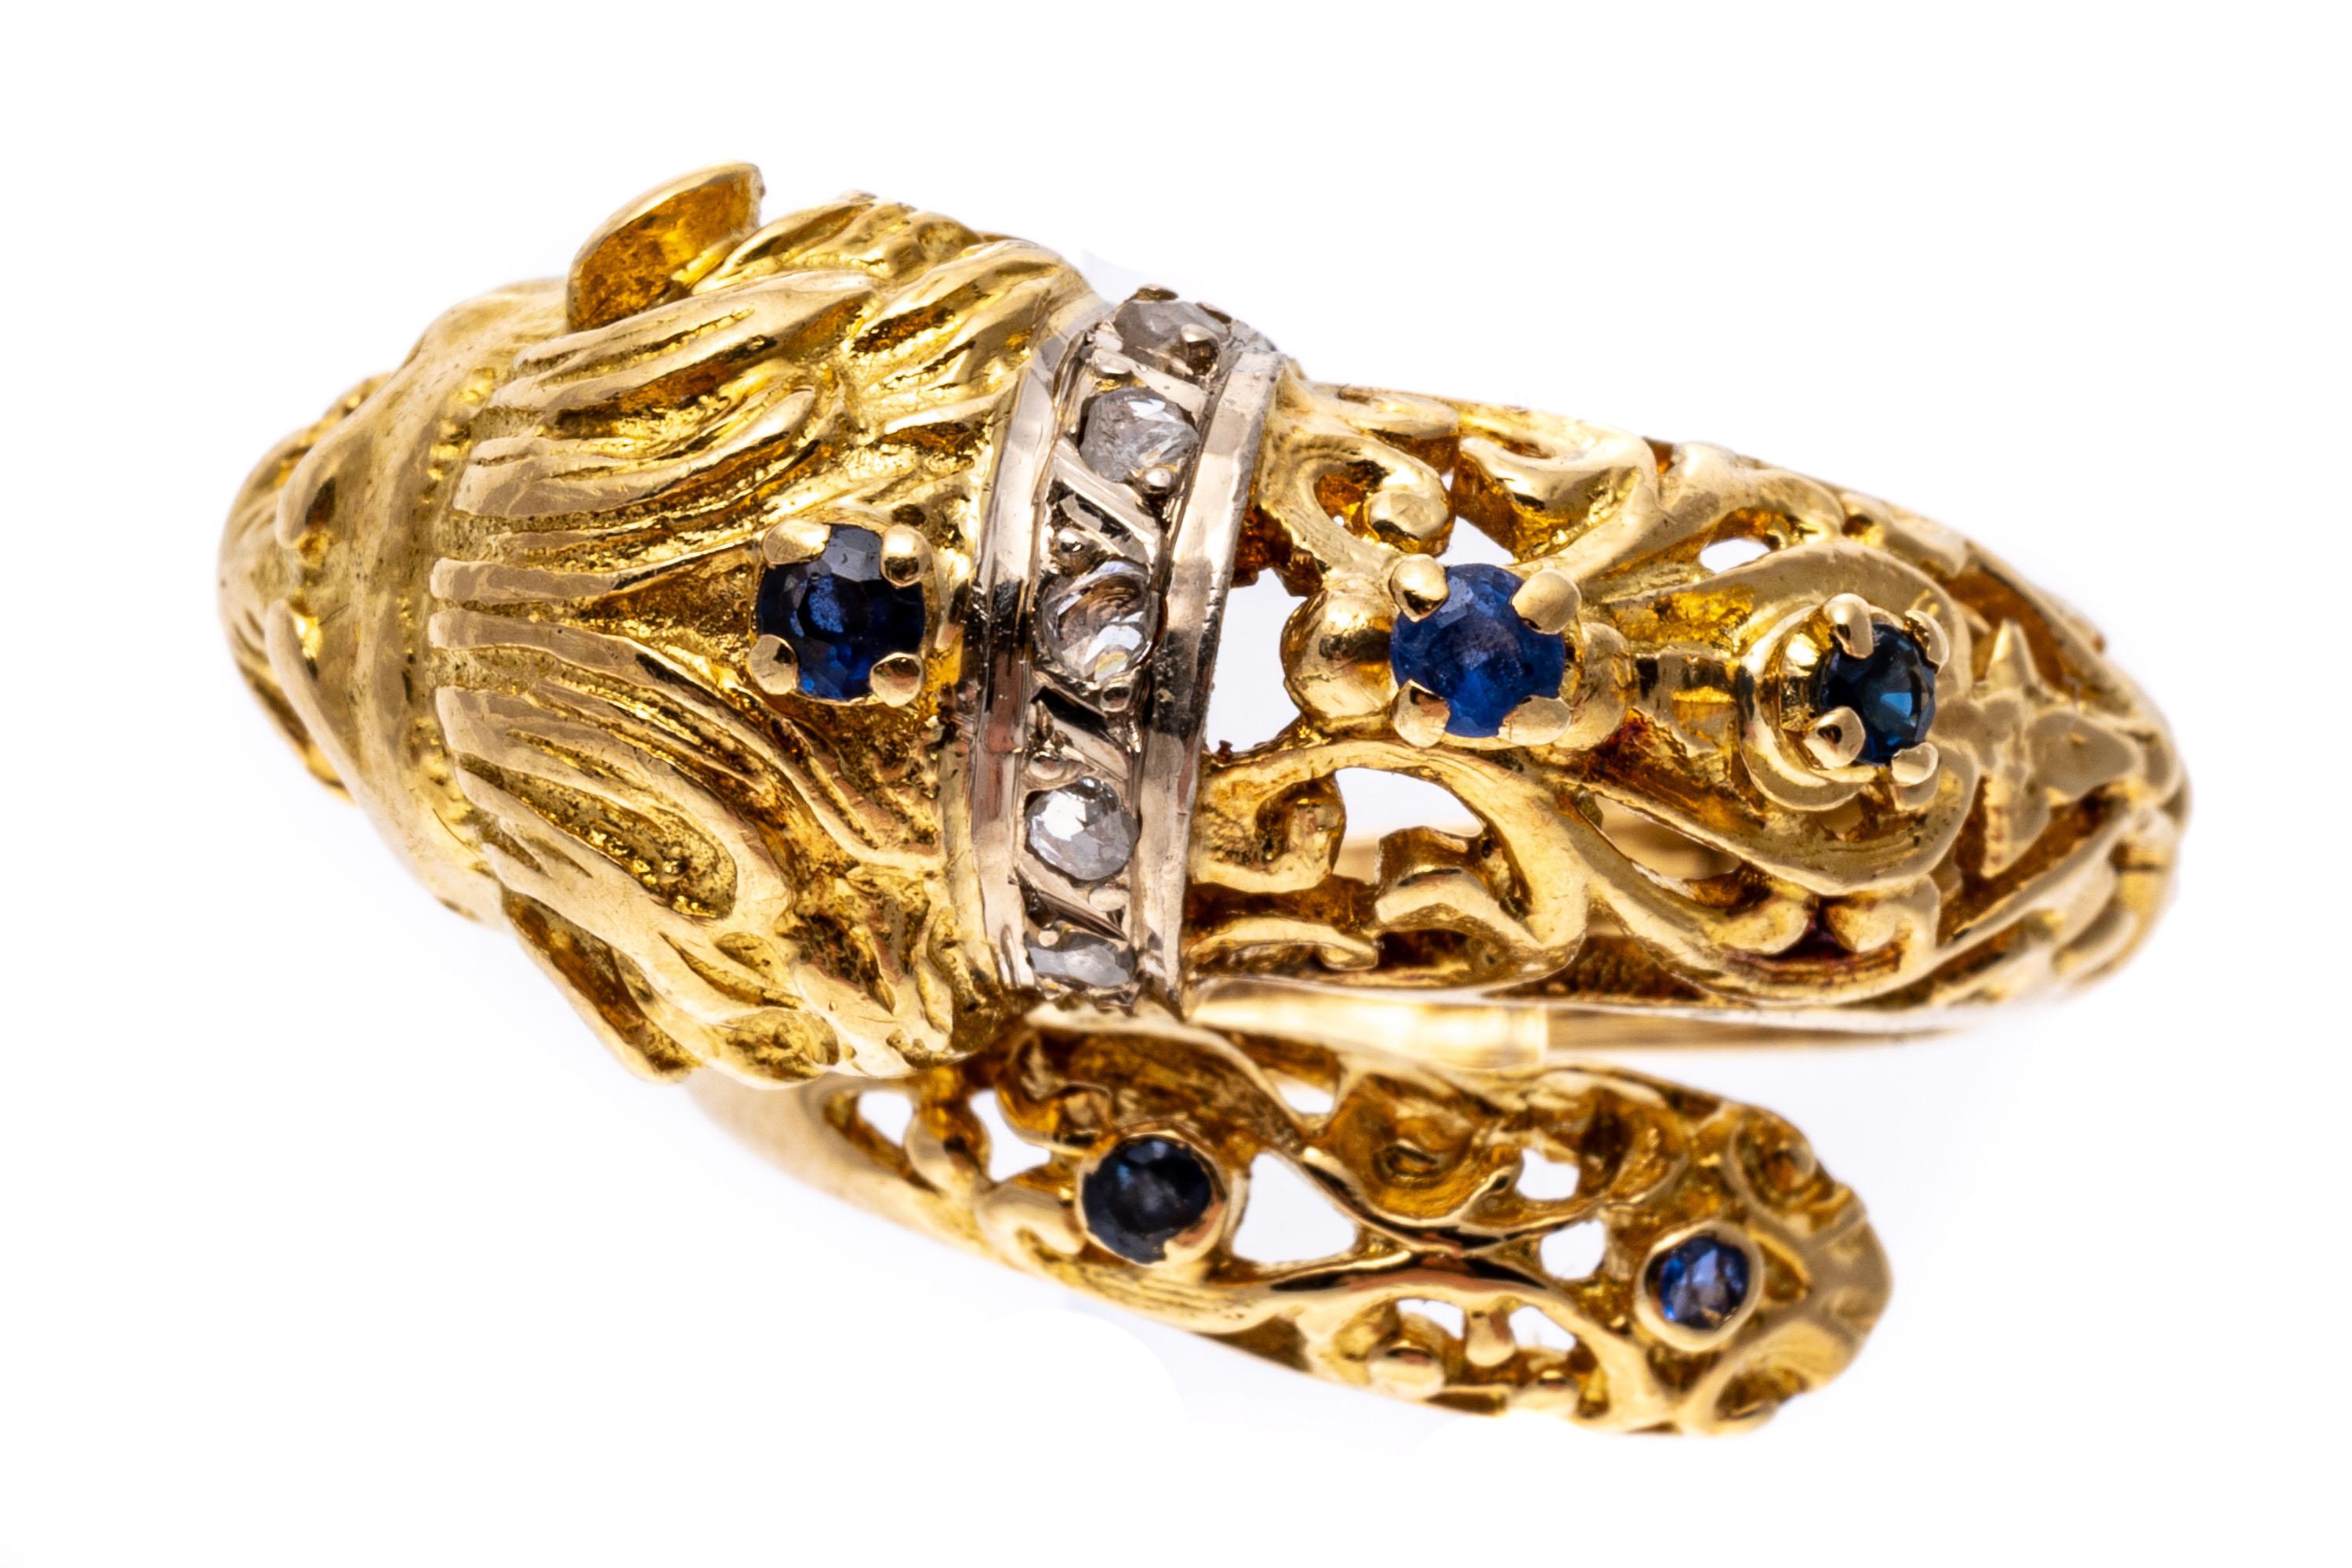 Retro 14k Yellow Gold Sapphire And Macle Diamond Lions Head Ring, Size 5.25 For Sale